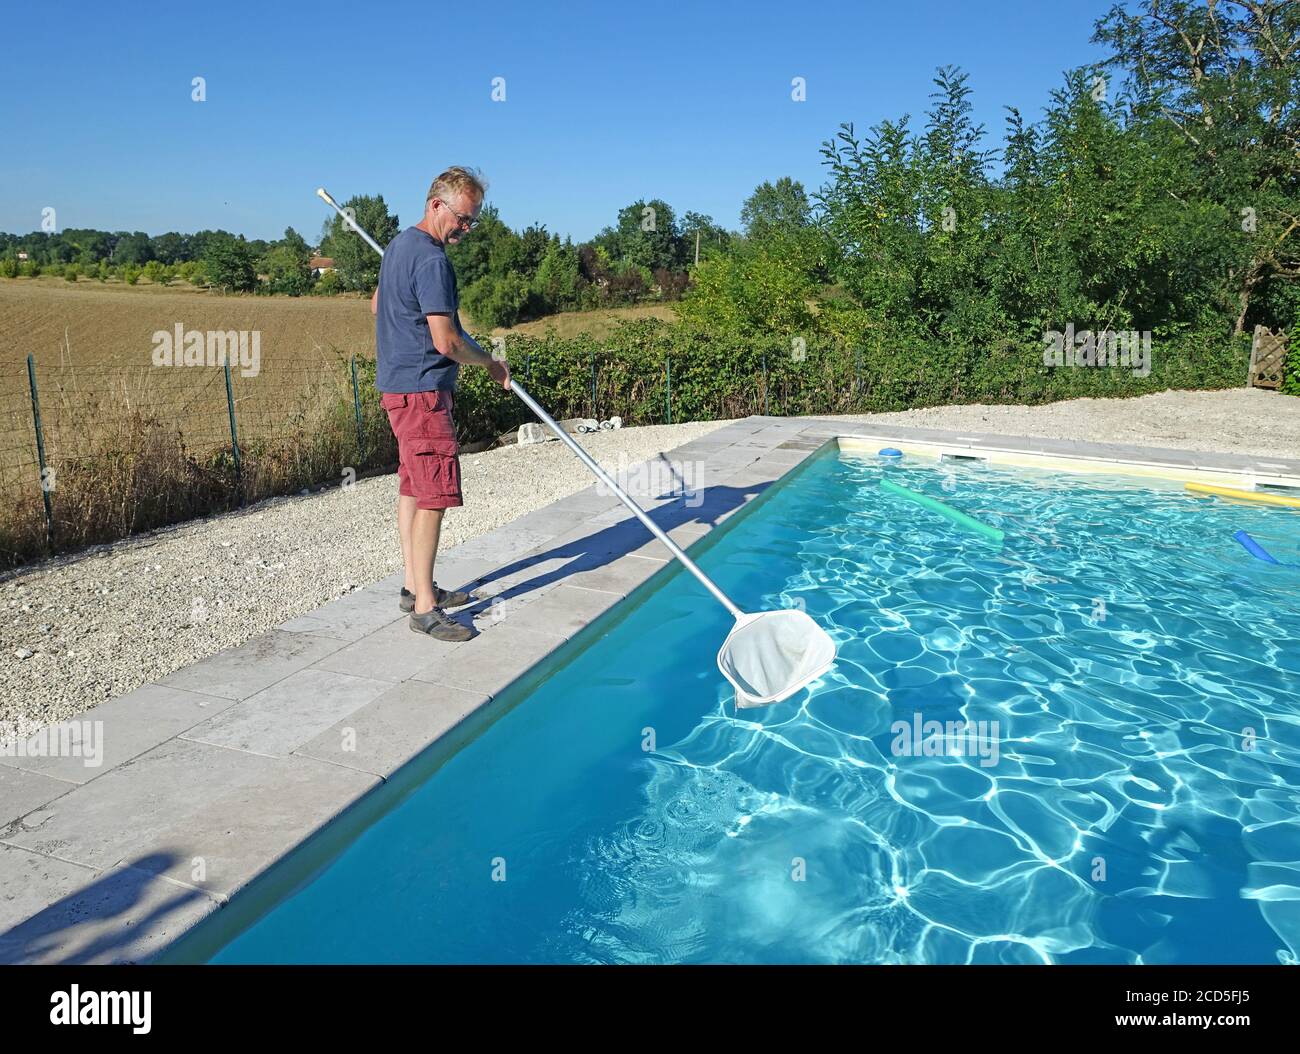 man cleaning a swimming pool with a net Stock Photo